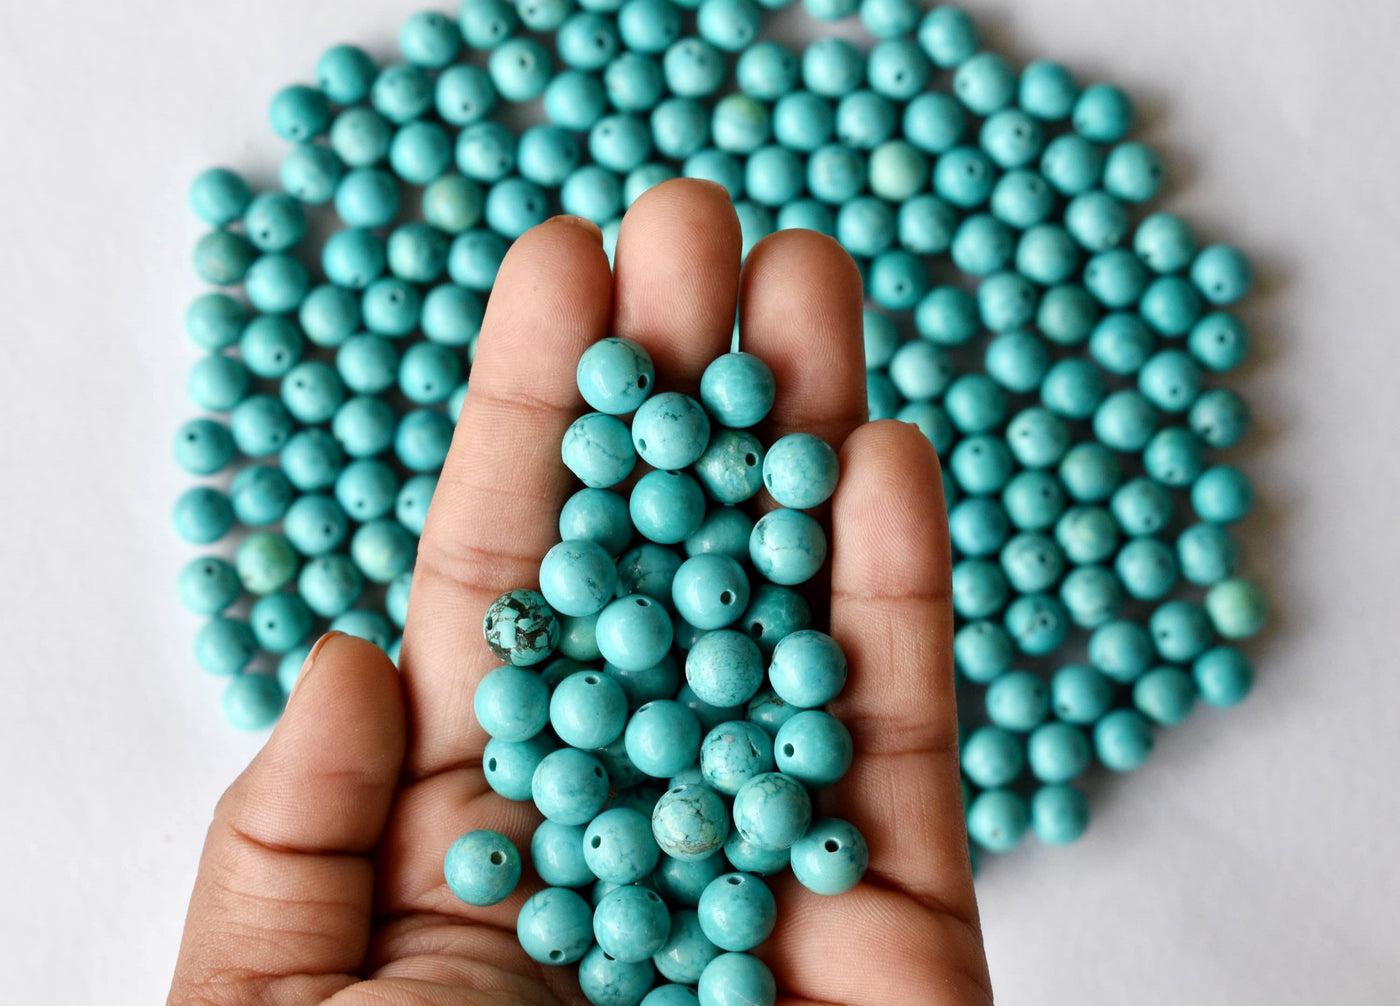 Turquoise Howlite Beads, Natural Round Crystal Beads 4mm to 10mm